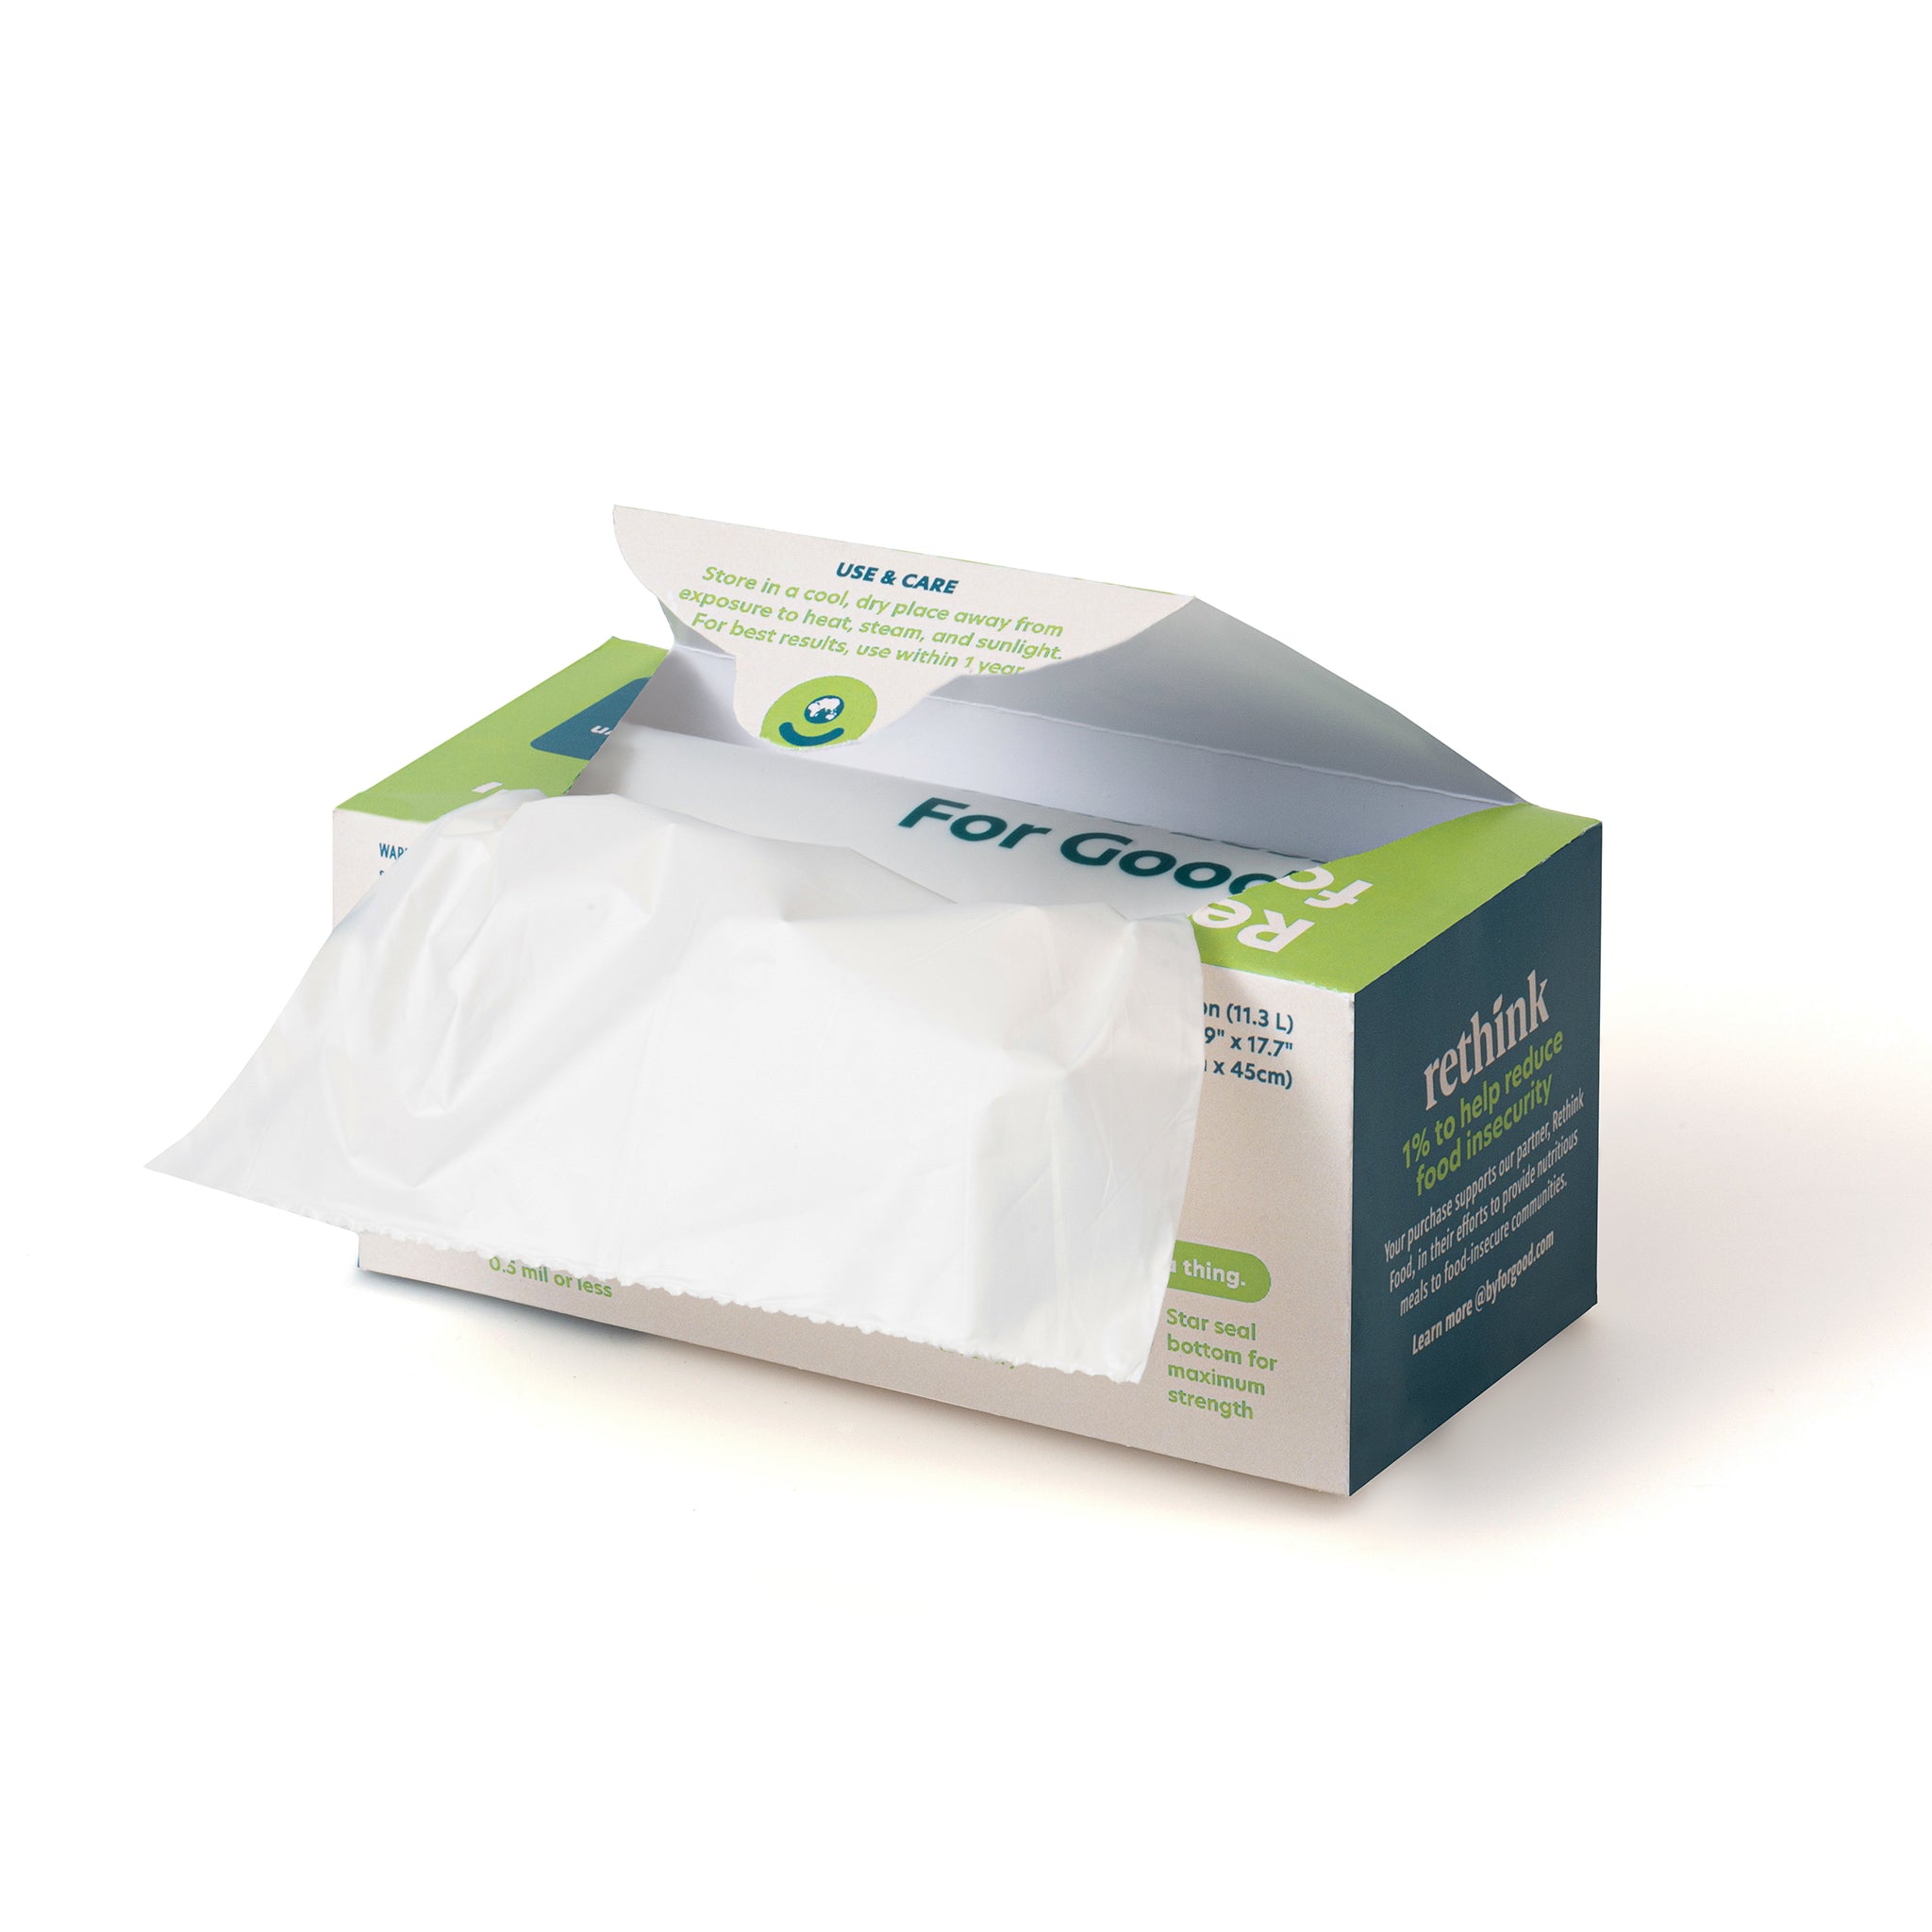 3 Gallon NaturBag Compostable Can Liners - Case of 500